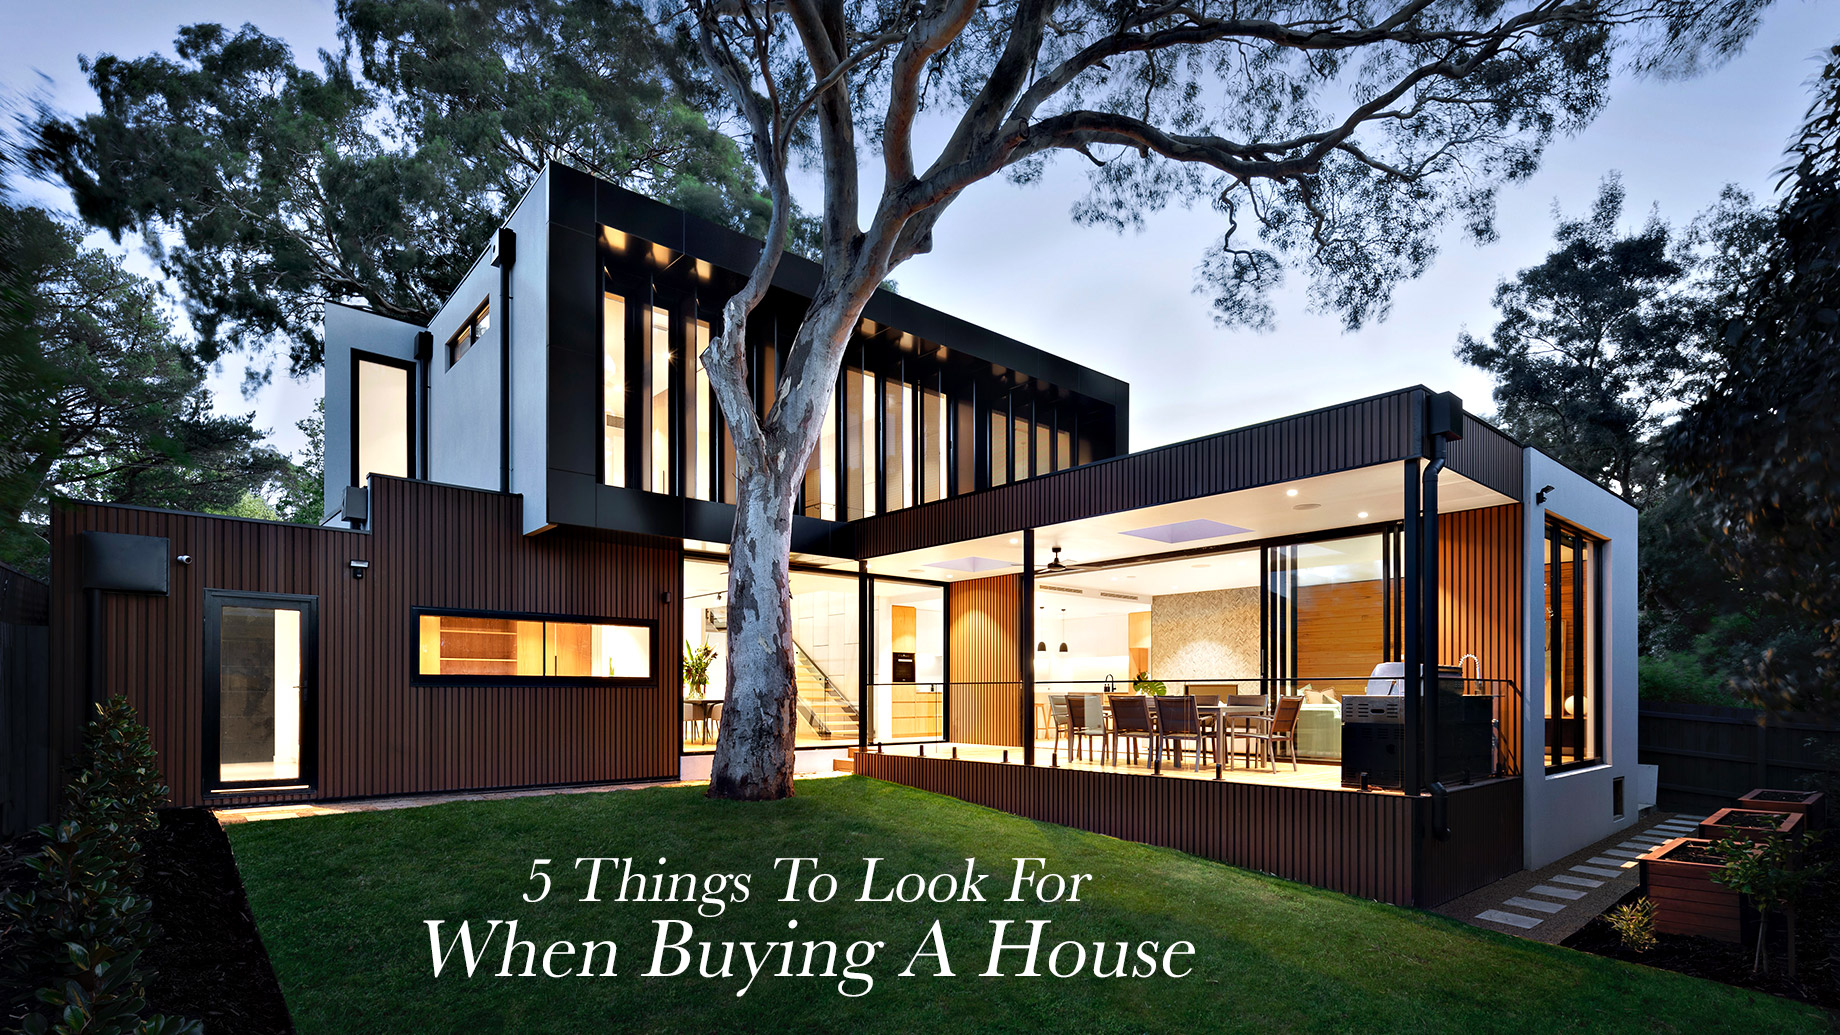 5 Things To Look For When Buying A House